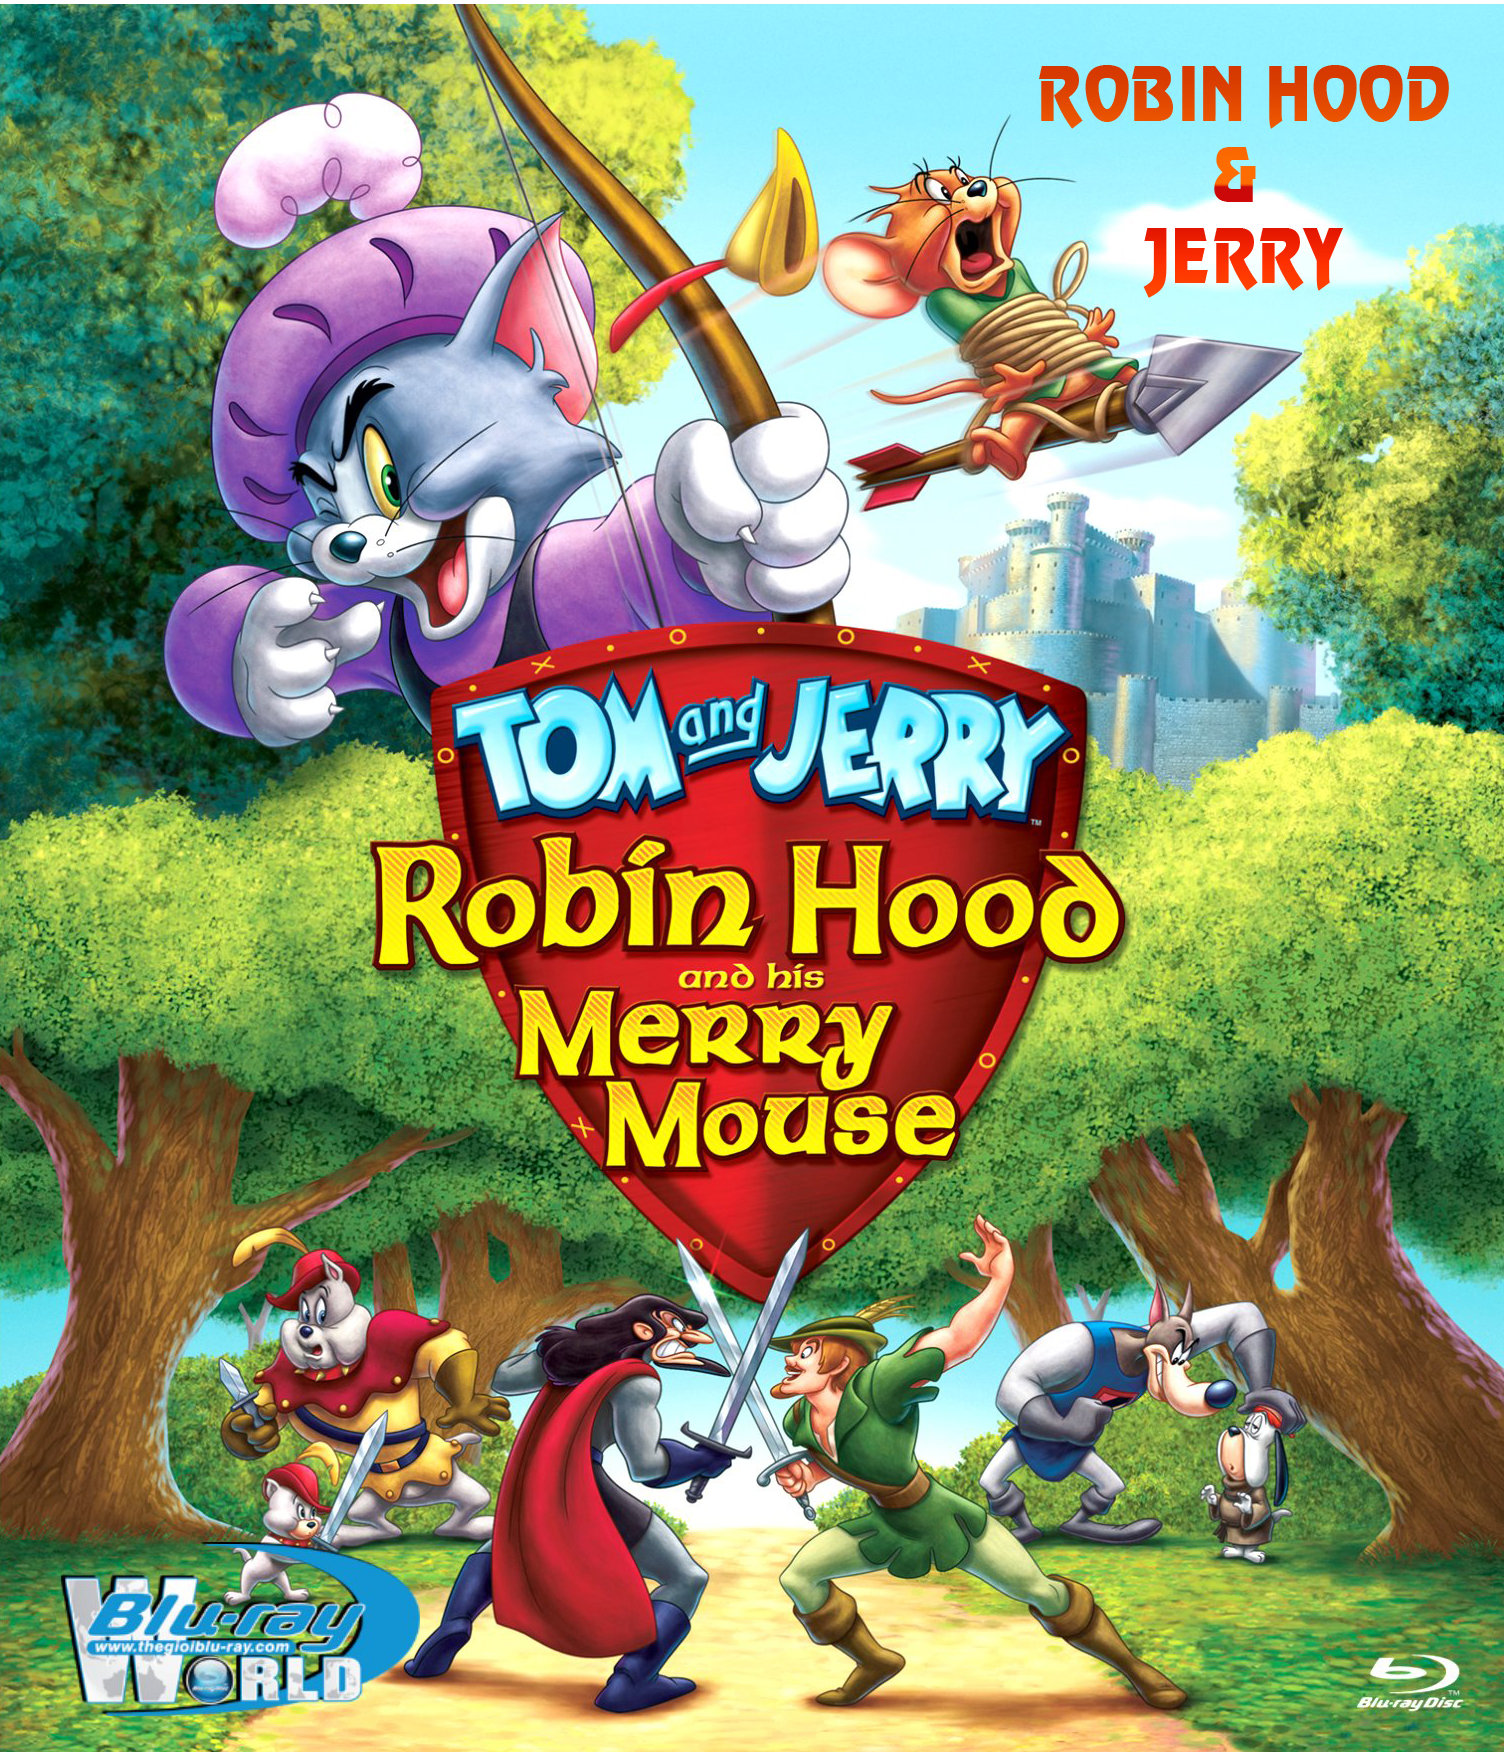 B1540. Tom and Jerry Robin Hood and His Merry Mouse - ROBIN HOOD & JERRY 2D 25G (DTS-HD MA 5.1) 